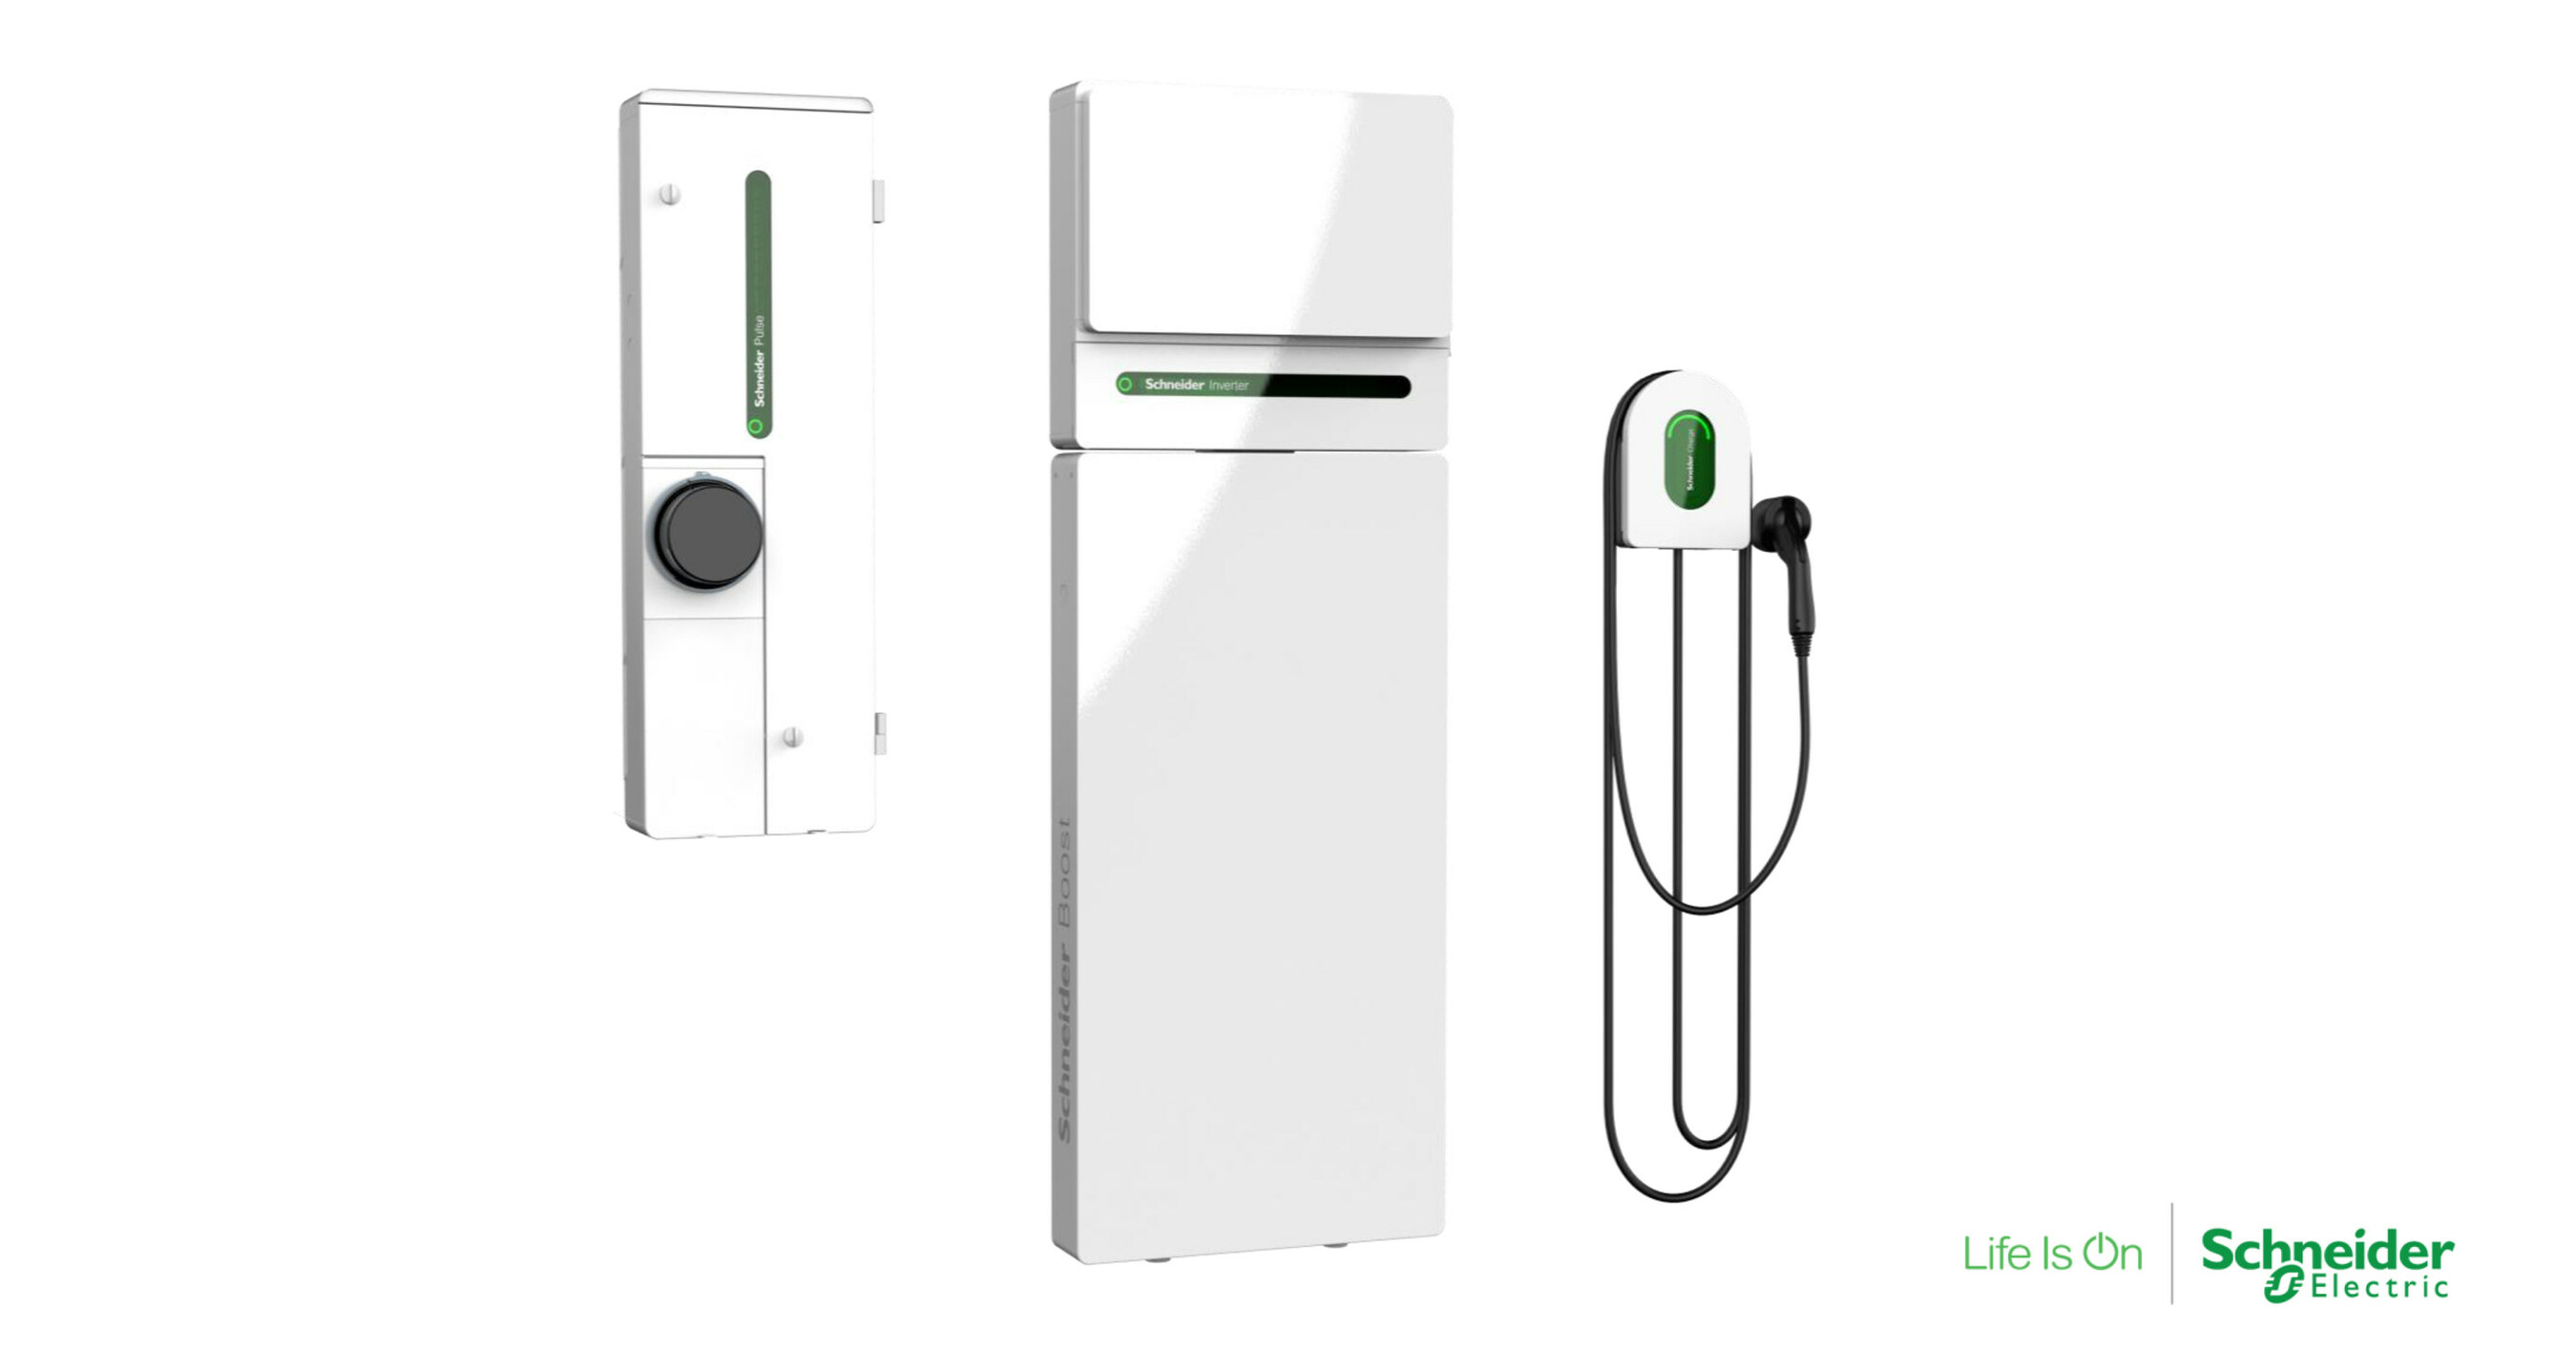 Schneider Electric Unveils First-of-its-Kind Simple, Smart, Sustainable  Home Energy Management Solution at CES 2023